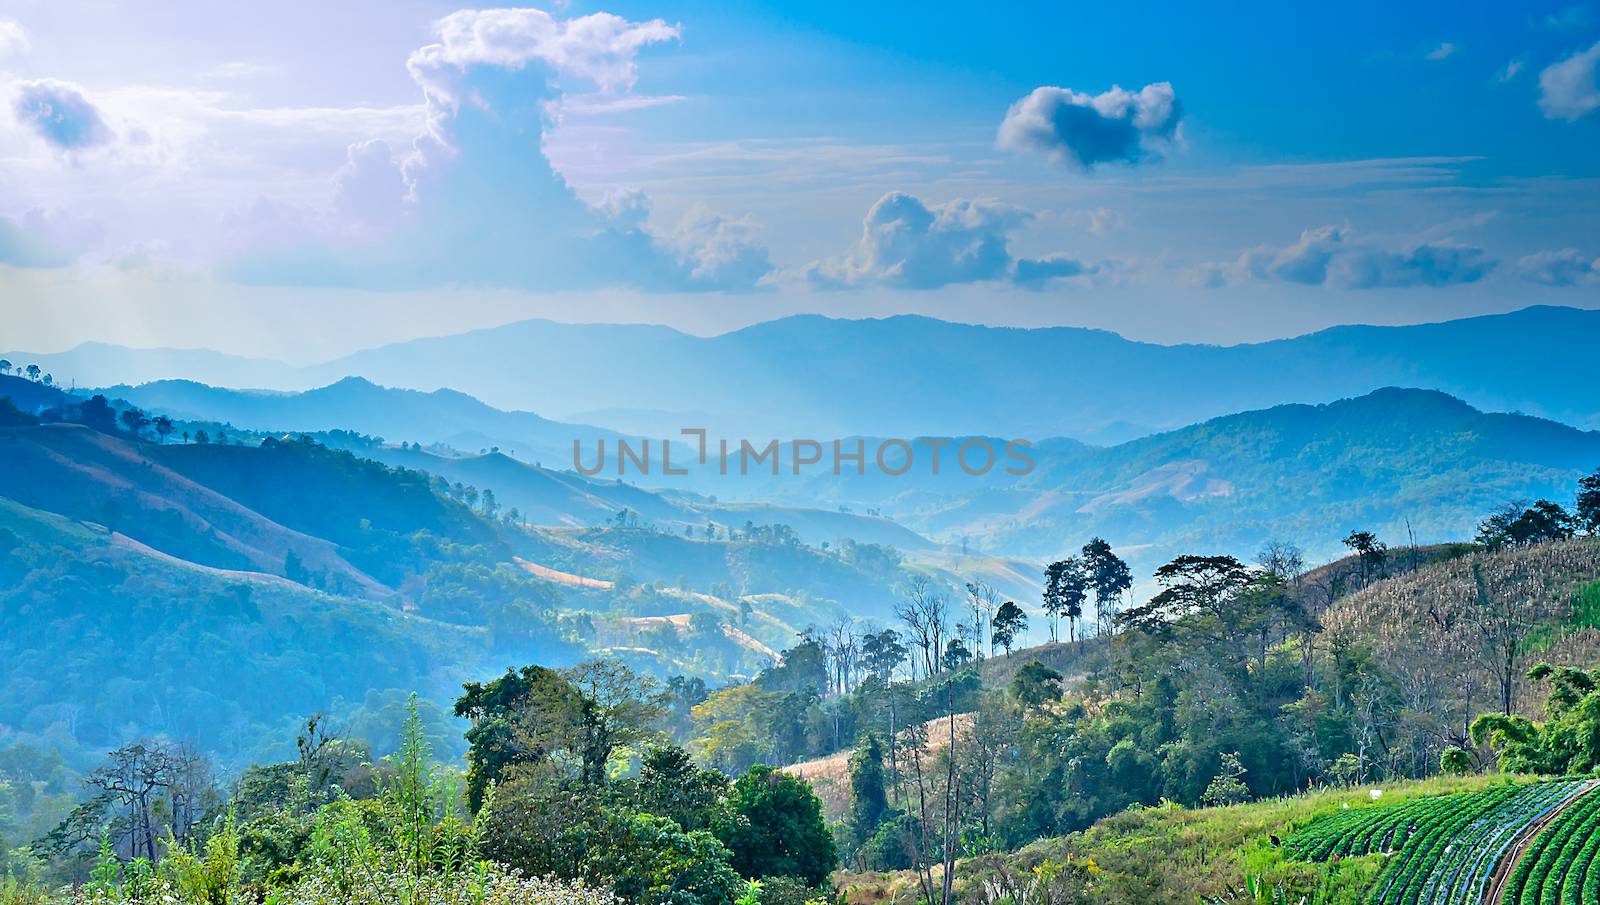 The Landscape with Blue Sky and Green on the Mountain.